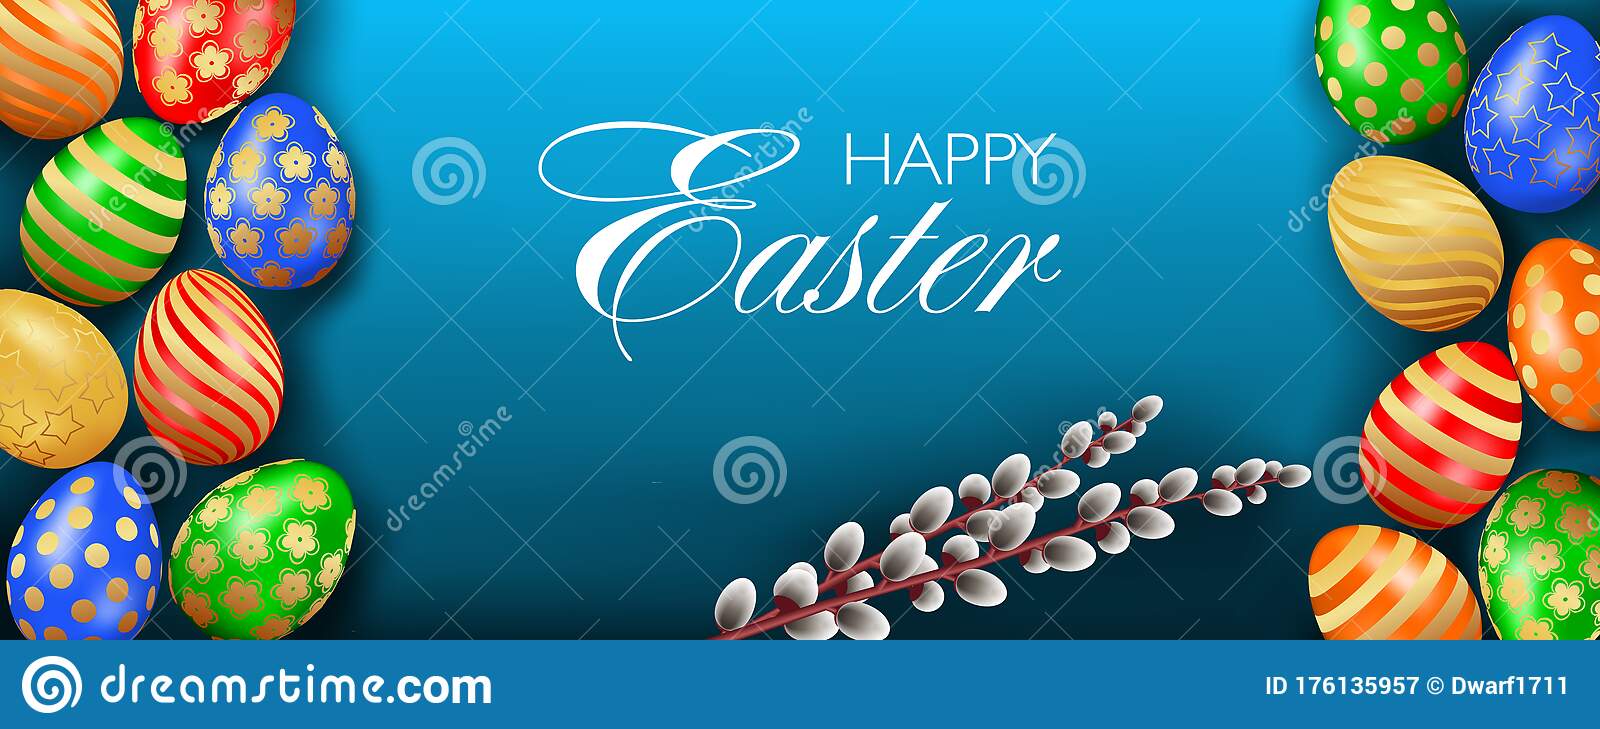 Pretty Happy Easter website header or banner template with multicolored realistic 3D eggs and willow trees on blue background top view 